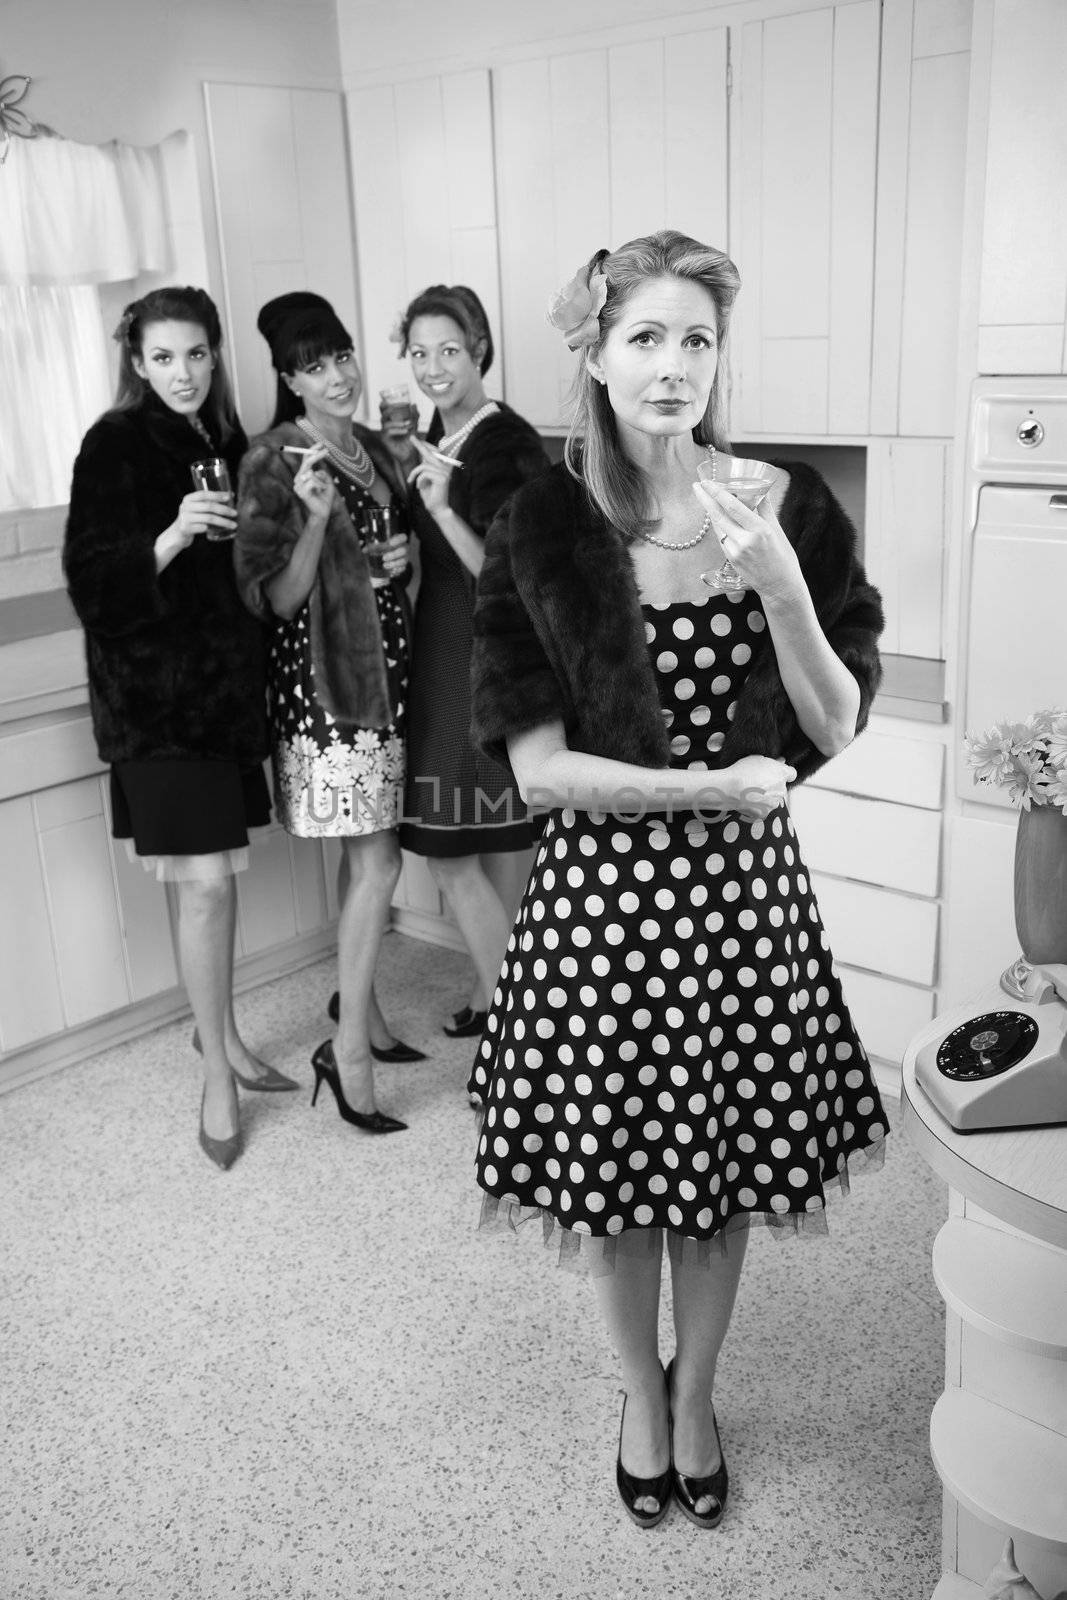 Four women smoking and drinking in a retro-style kitchen scene